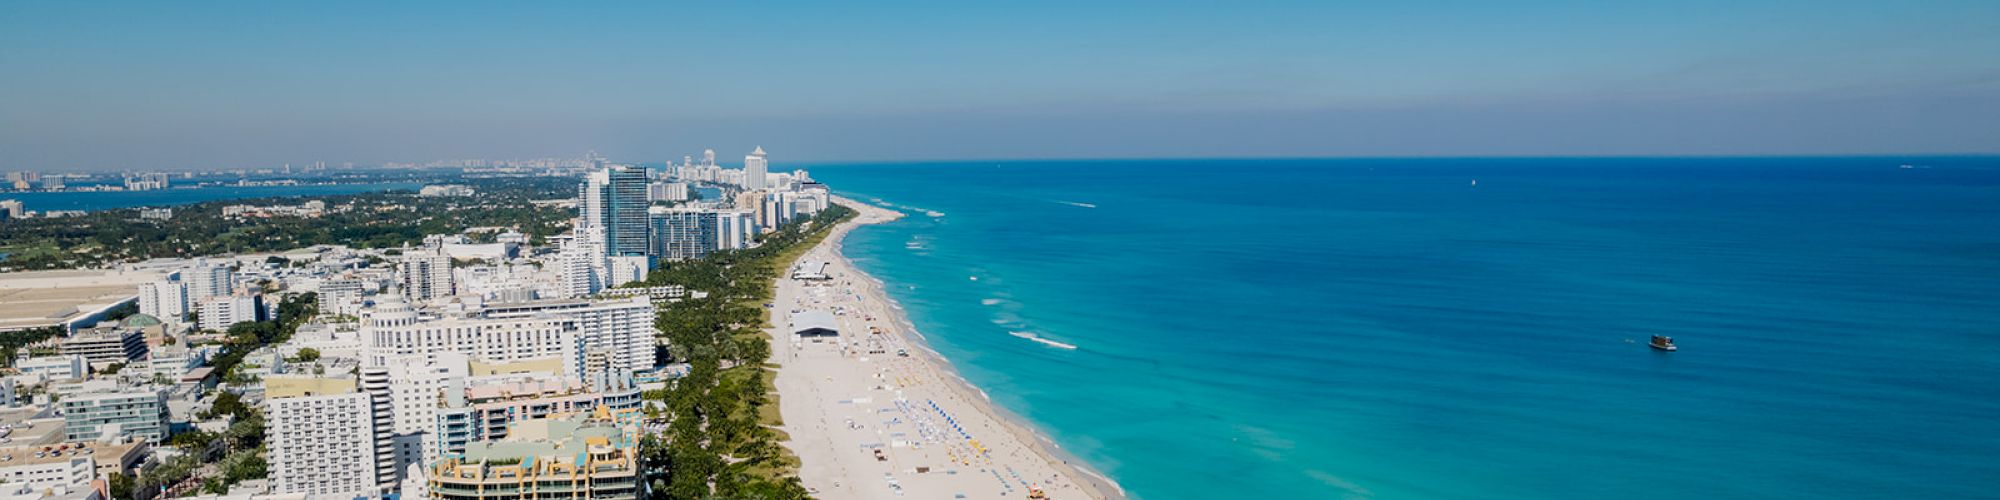 Aerial view of a coastal city with high-rise buildings along a sandy beach, clear turquoise water, and a bright blue sky.